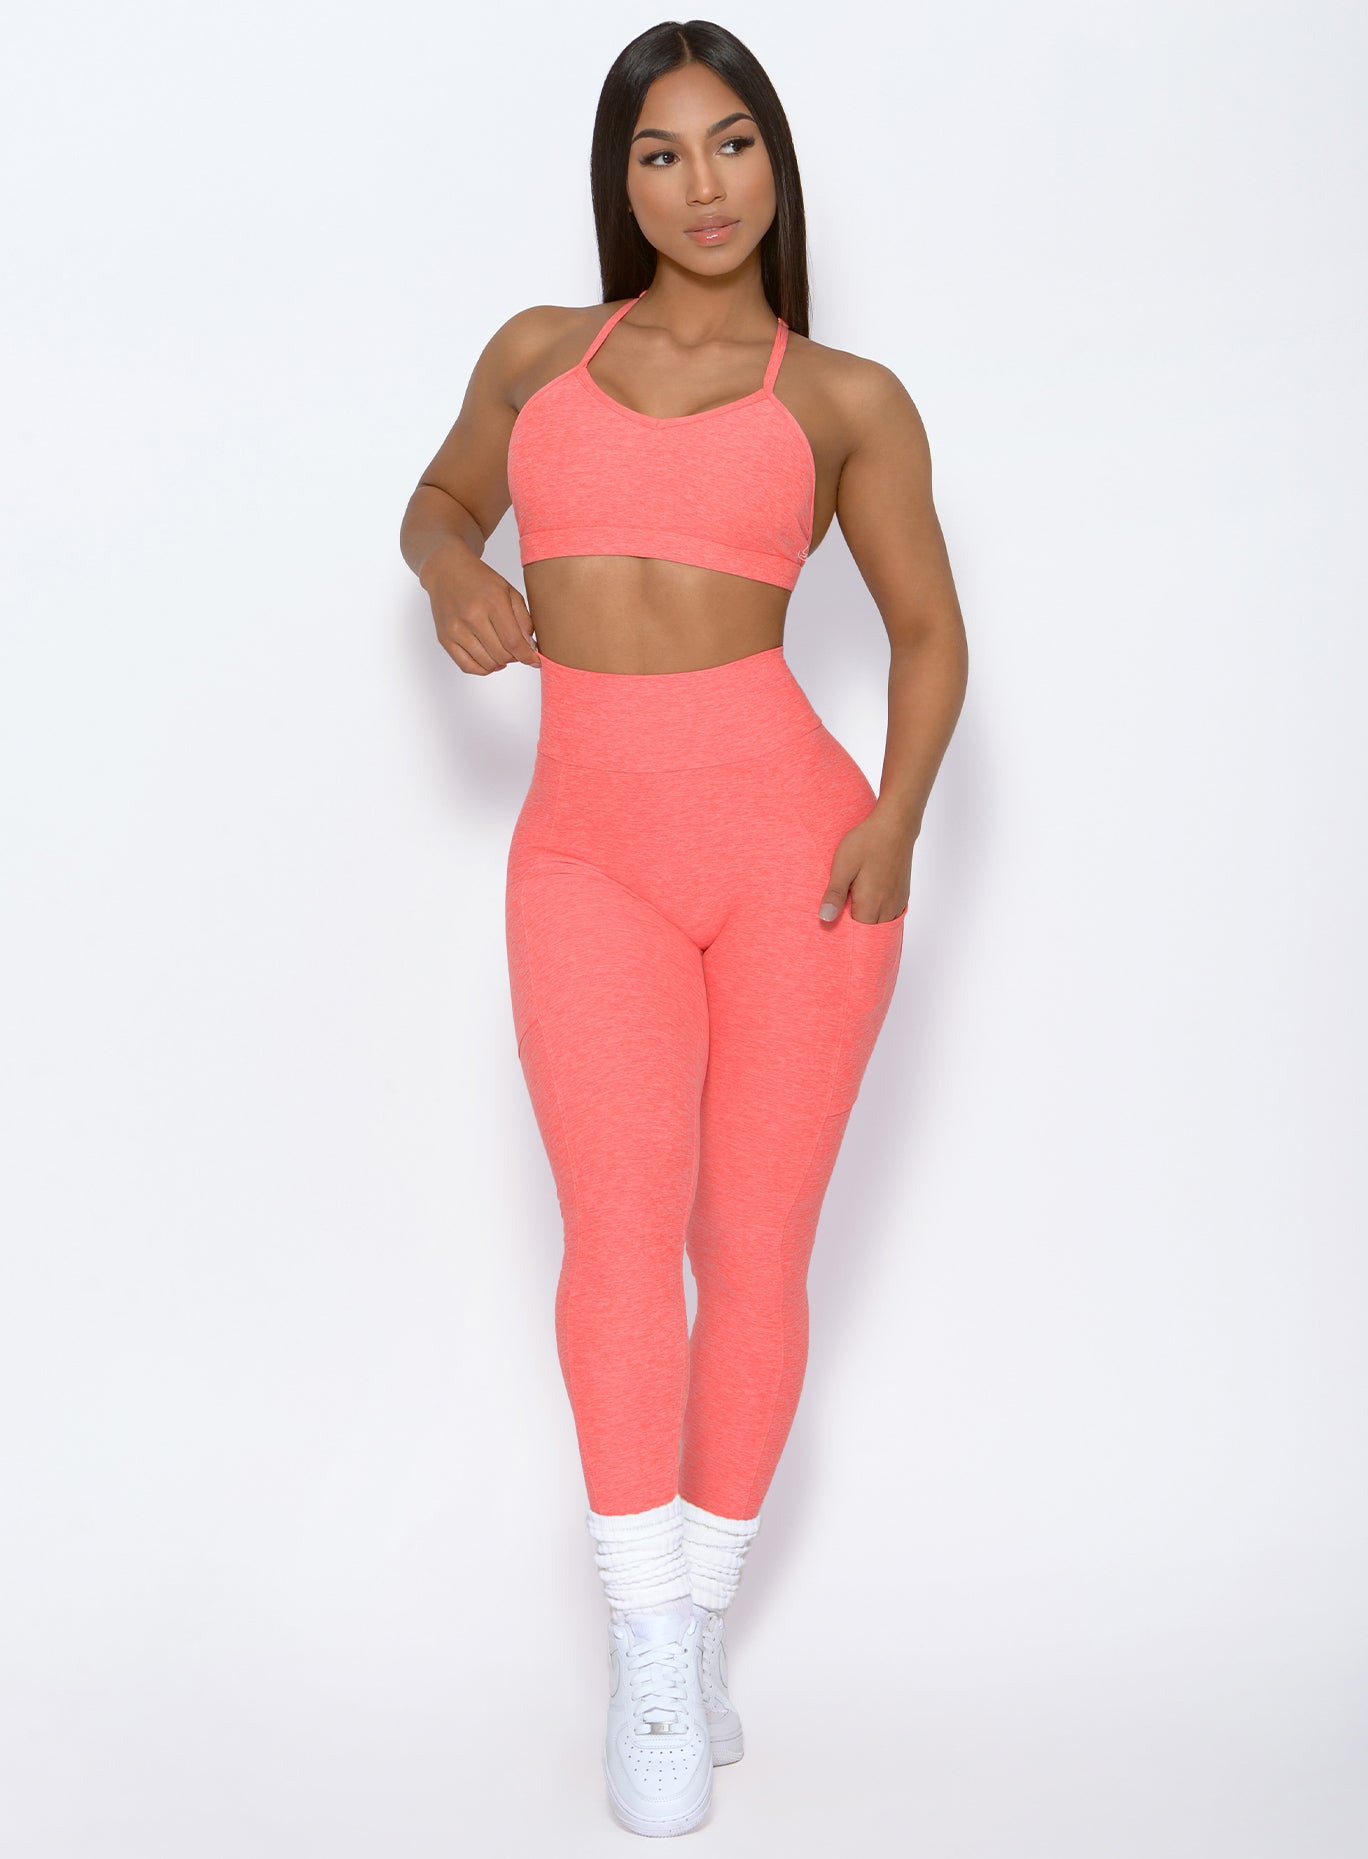 front profile view of a model wearing Curve leggings and the Braid Back Sports Bra in Coral color